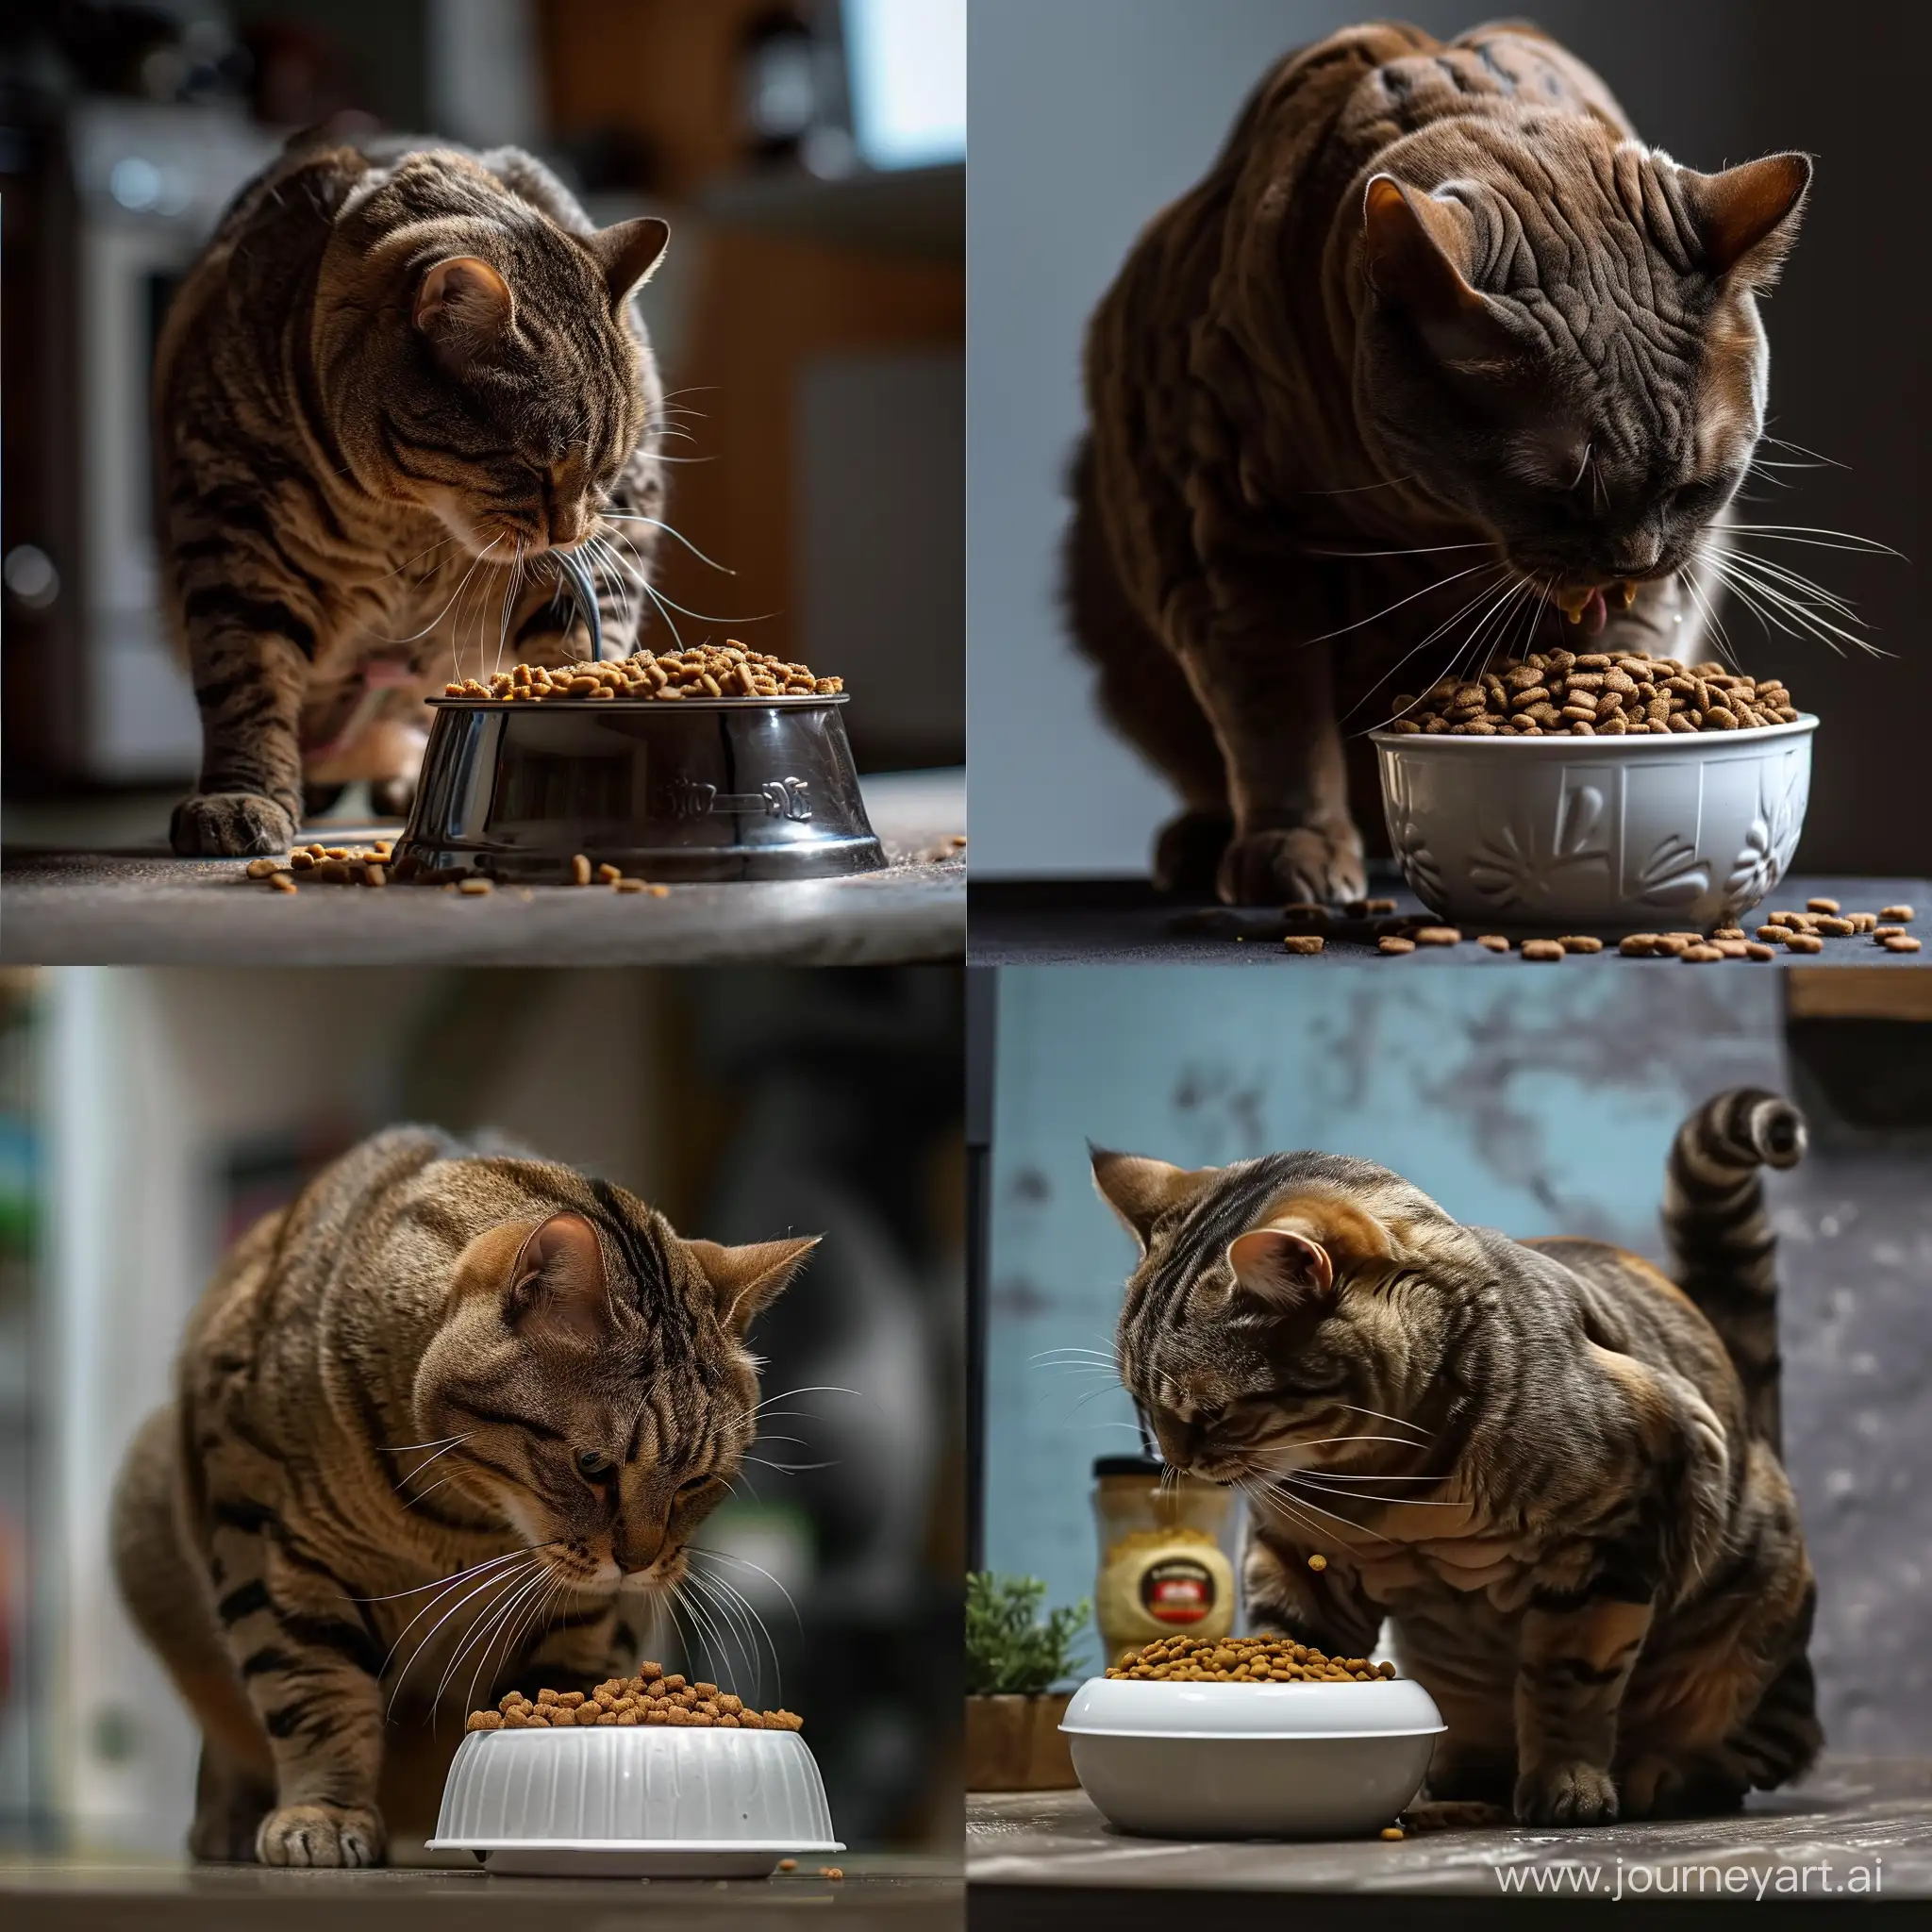 Muscular-Cat-Enjoying-a-Hearty-Meal-from-Its-Bowl